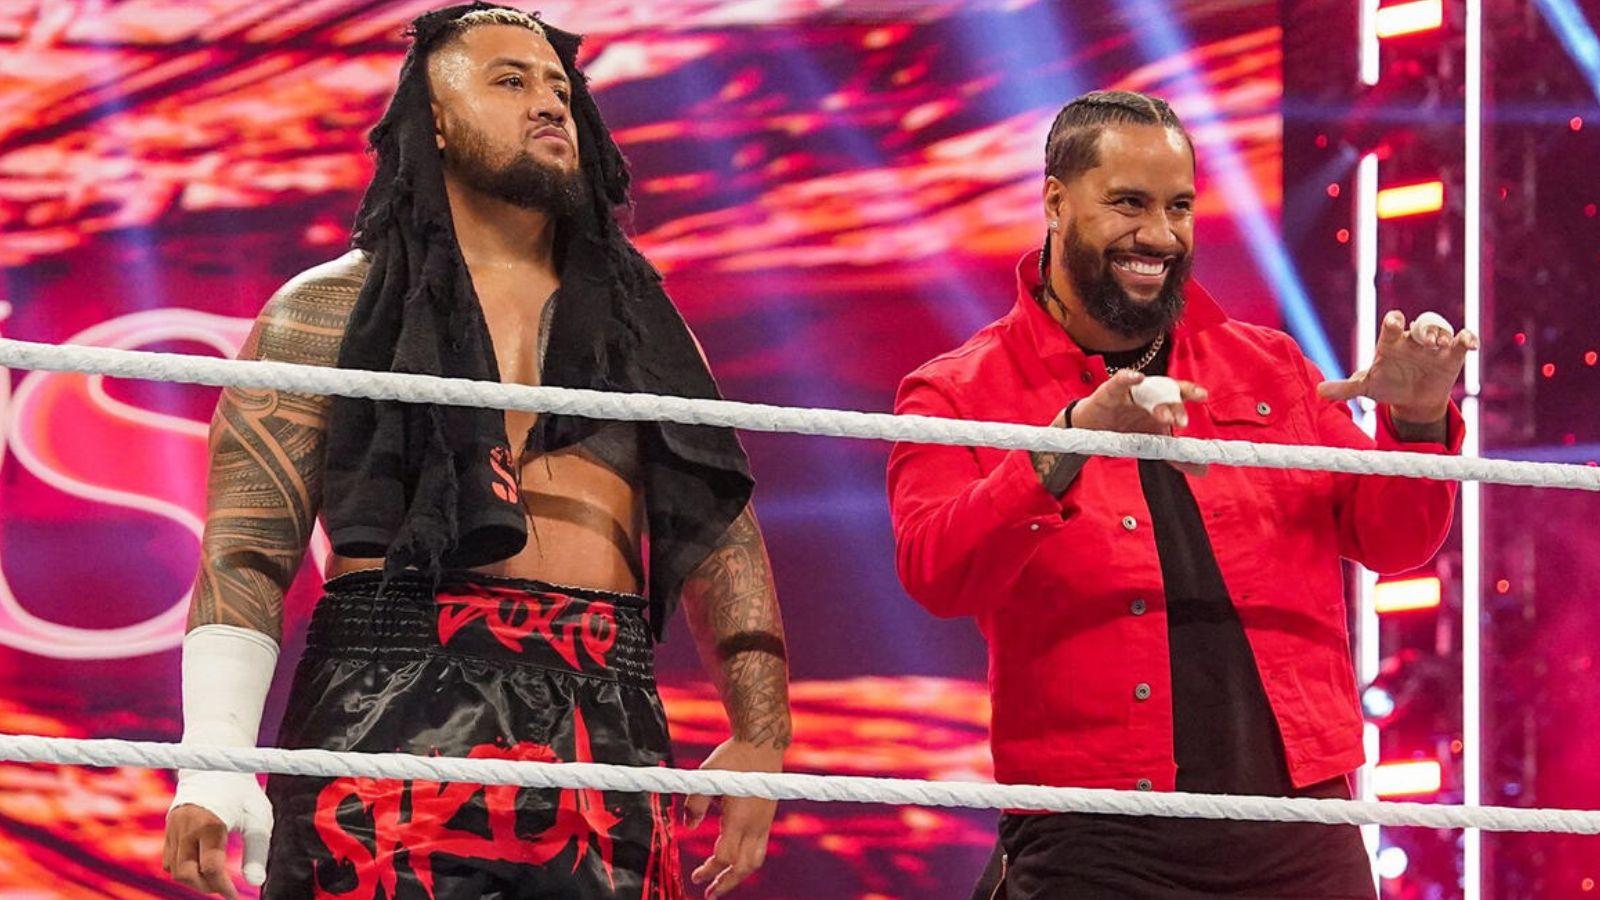 Solo Sikoa (left) and Jimmy Uso (right) ringside as WWE superstars.